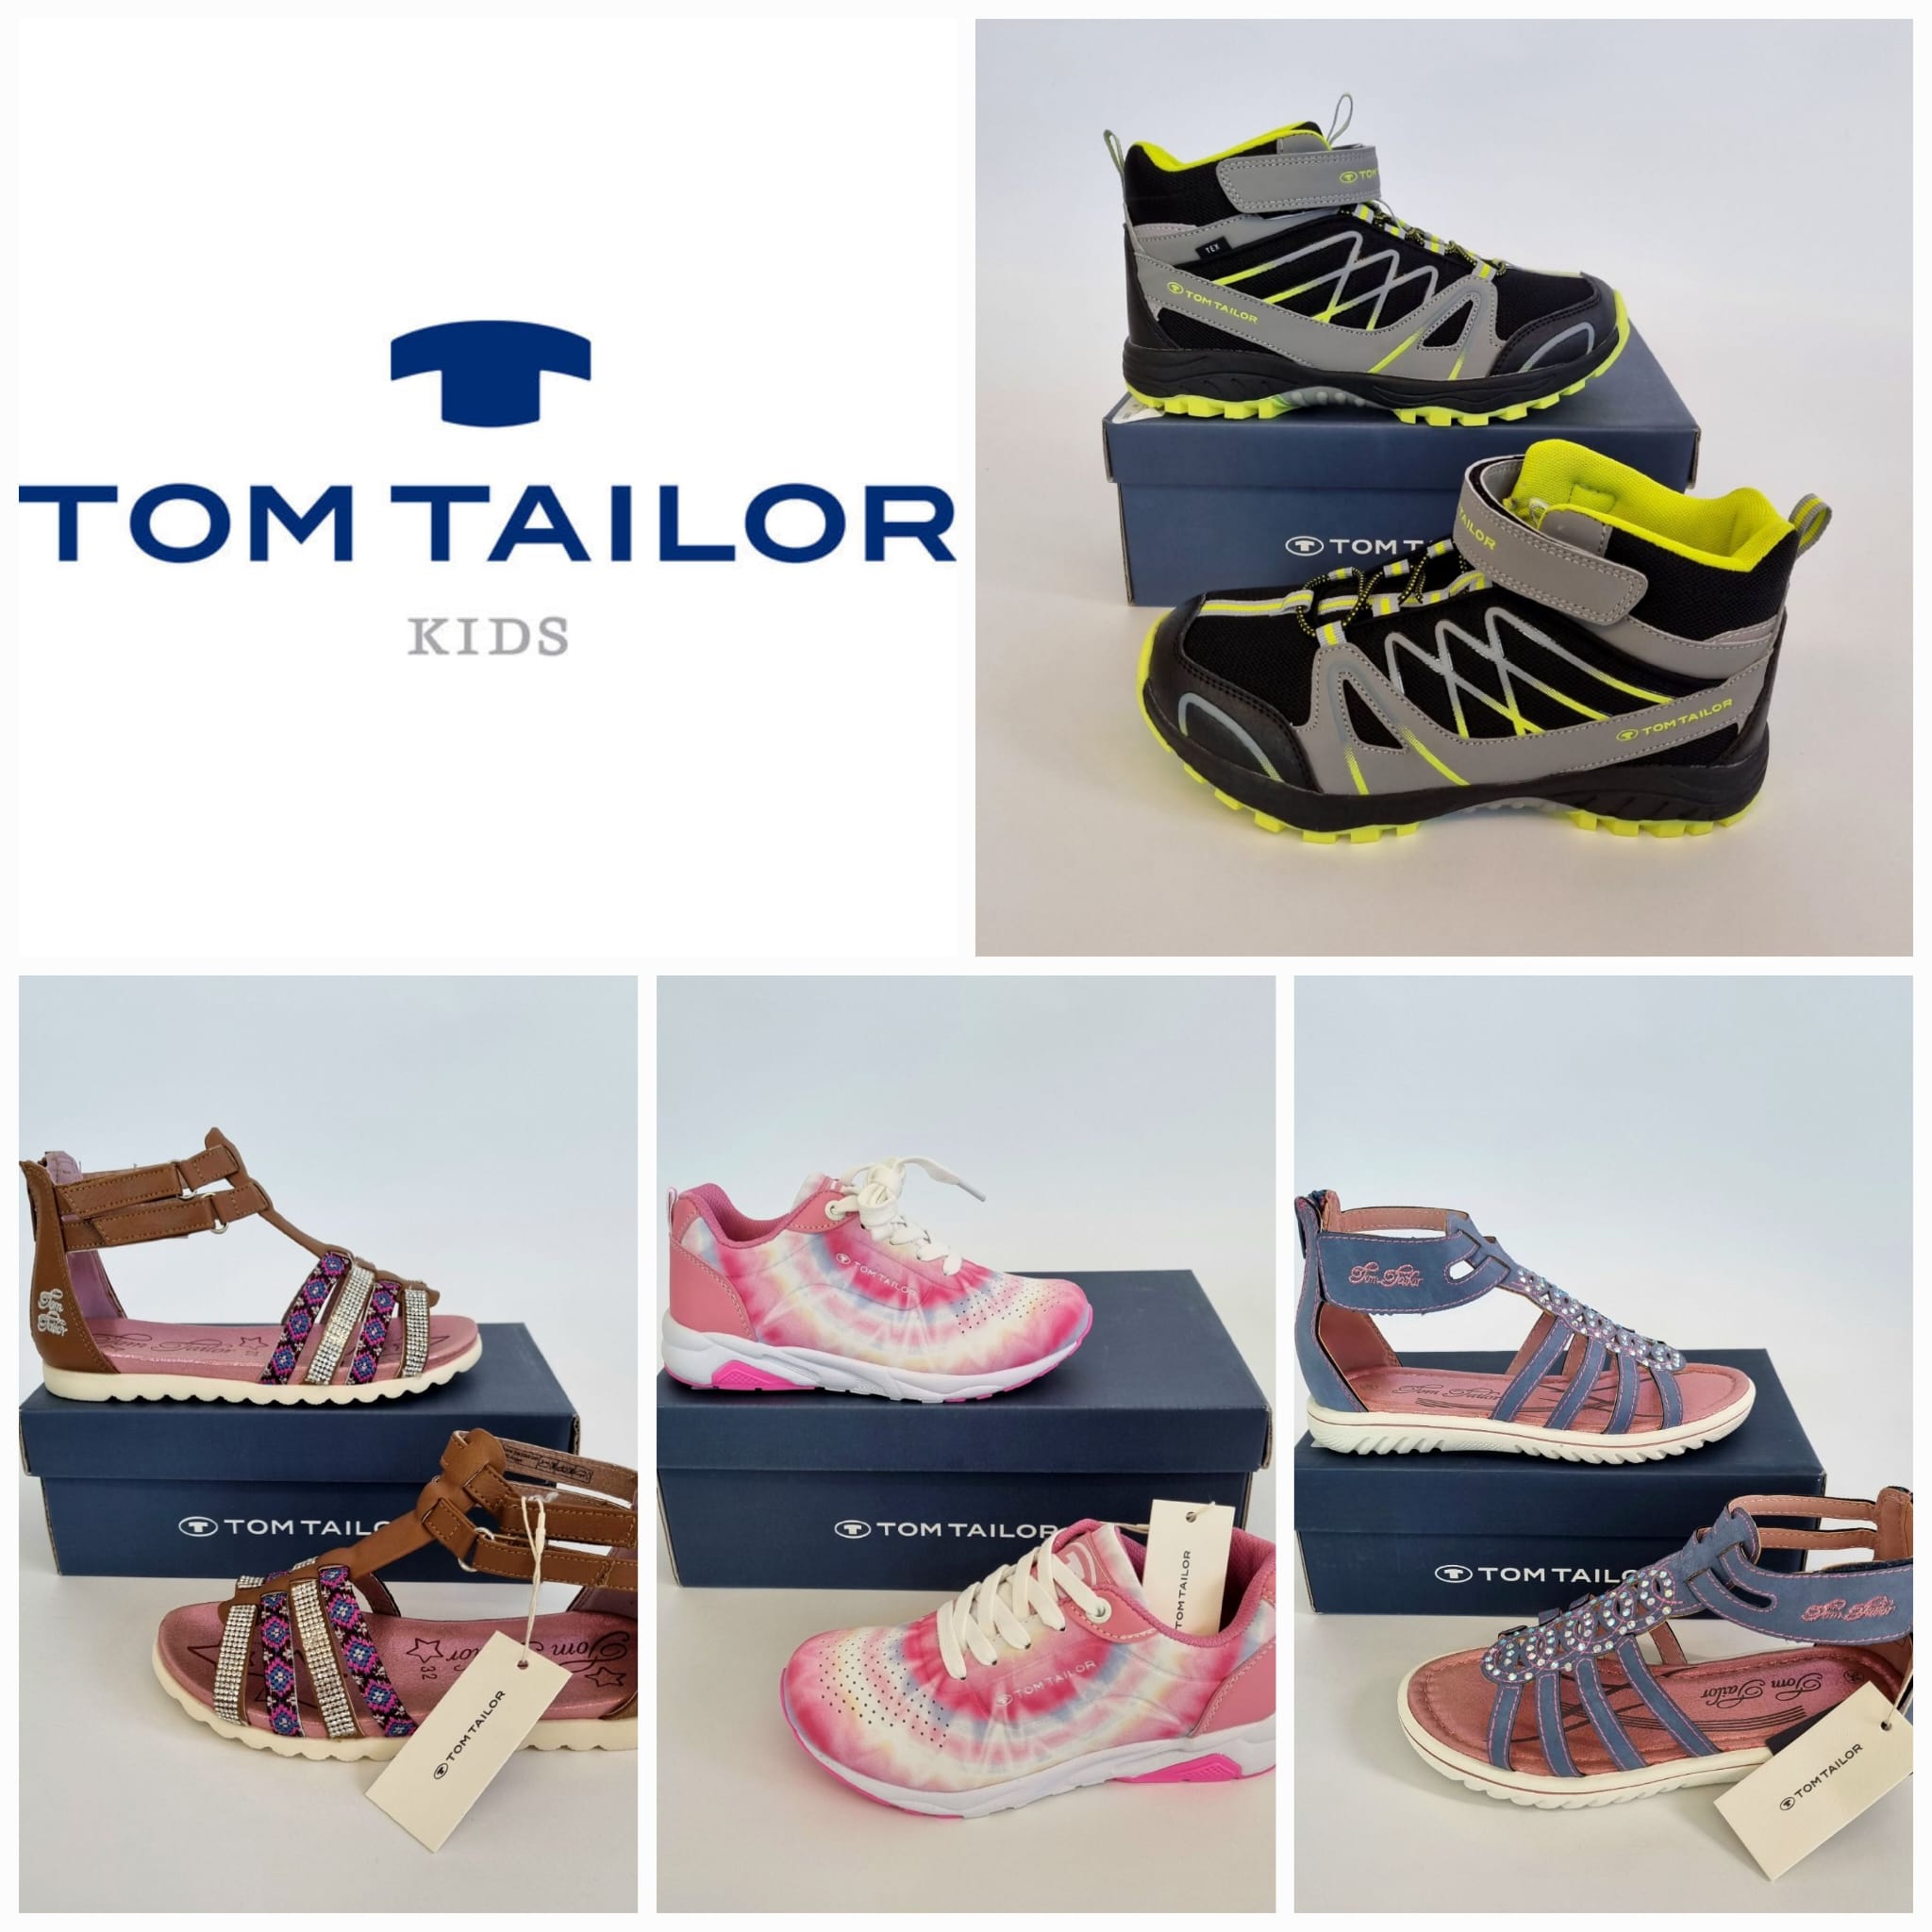 A mix of children's shoes by Tom Tailor